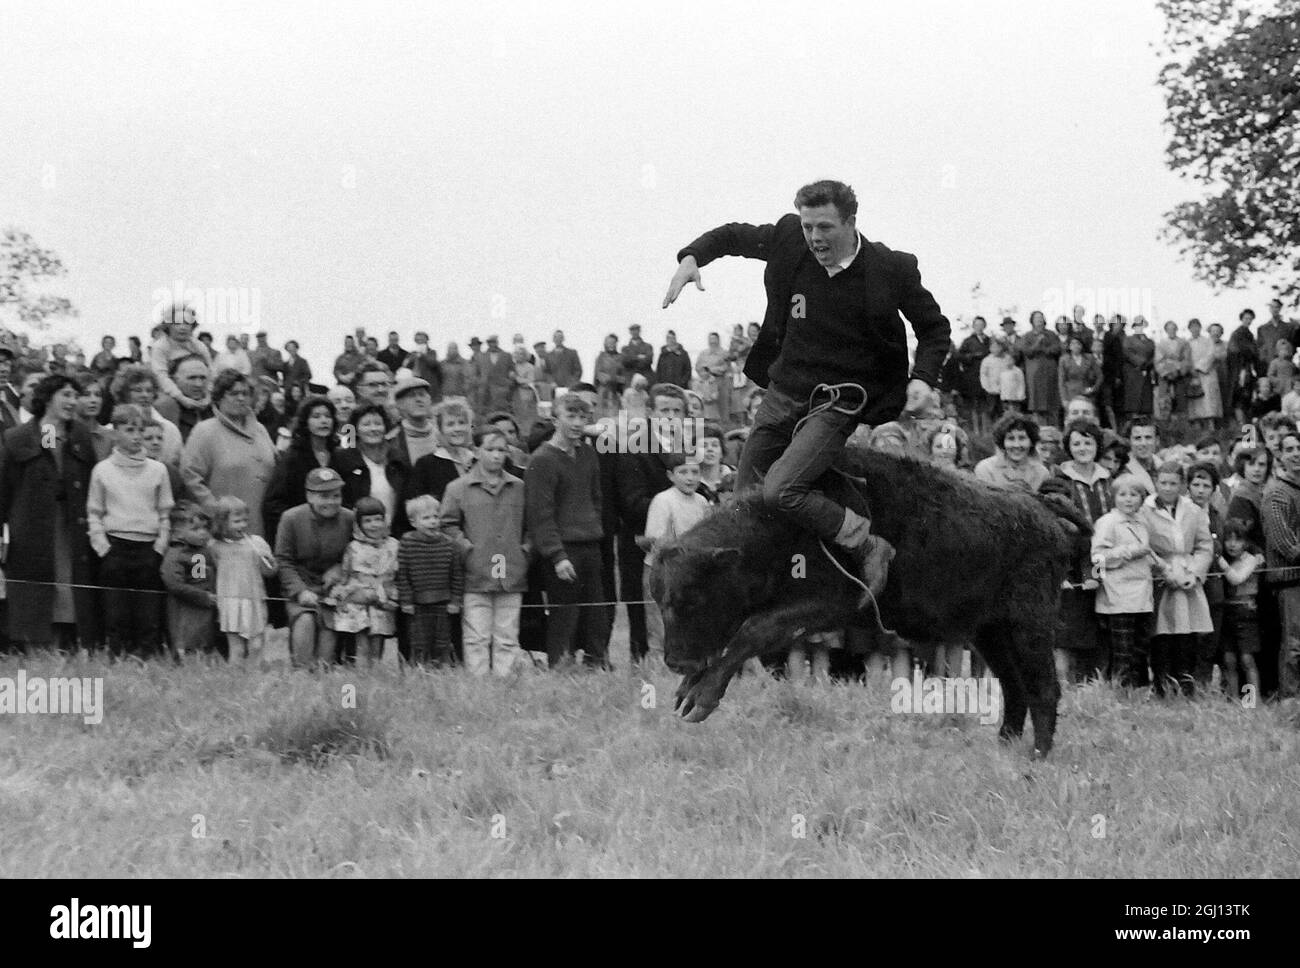 13 MAY 1962 WILLIAM STEVENS TRIES HIS LUCK IN THE DARTMOOR WILD STEER RODEO AT PLYMPTON, DEVON, ENGLAND. Stock Photo